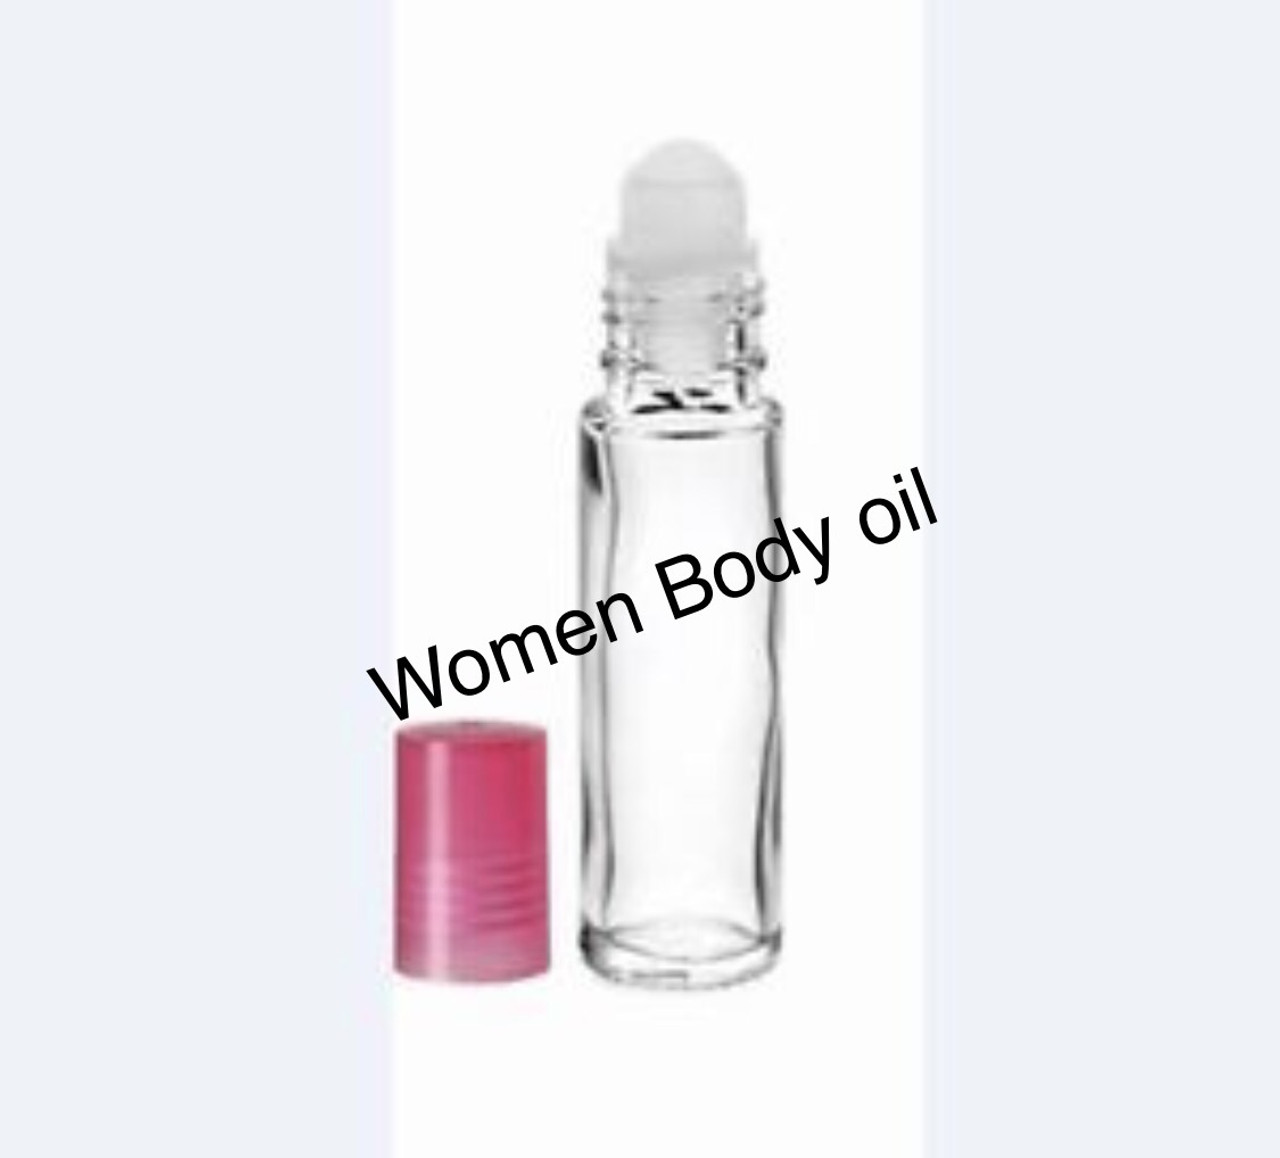 Coco Mademoiselle women Perfume Body Oil 1/3 oz roll-on (1) – Perfume Body  Oil and Gifts